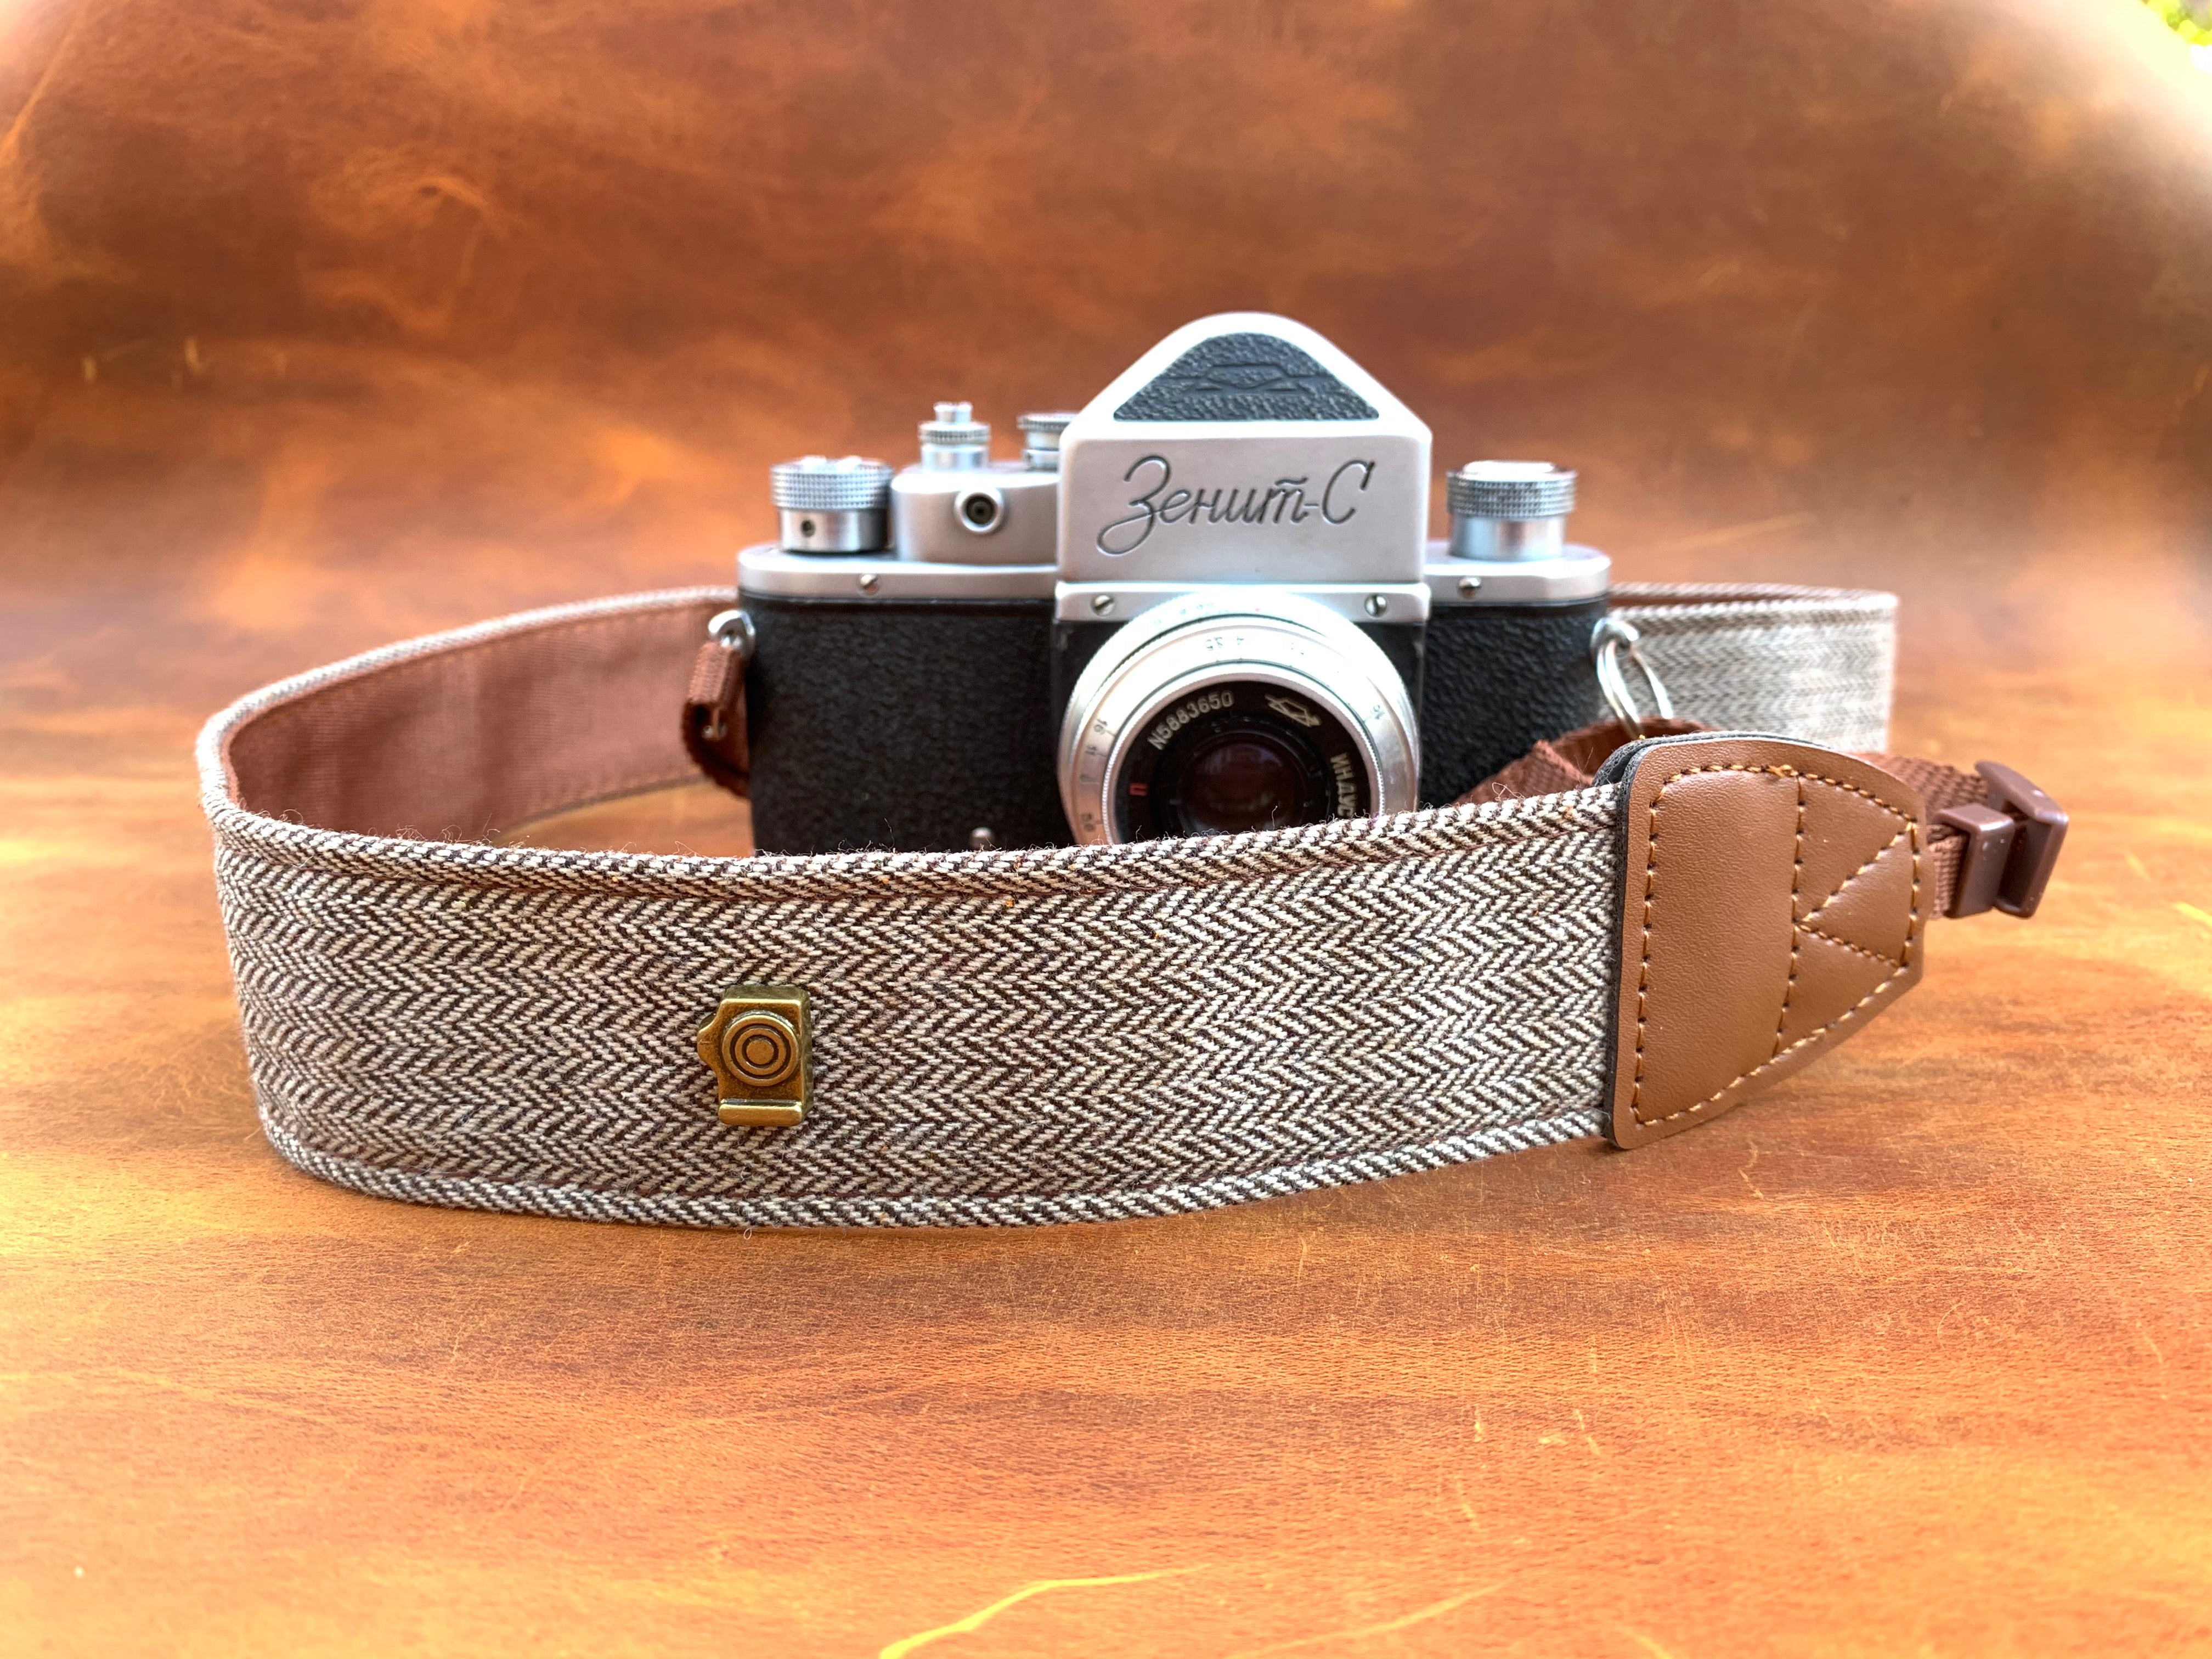  Personalized Leather Camera Strap - Custom camera strap -  Shoulder Neck Strap for DSLR/SLR - Photographer gift with monogram -  Fathers day gift. : Handmade Products